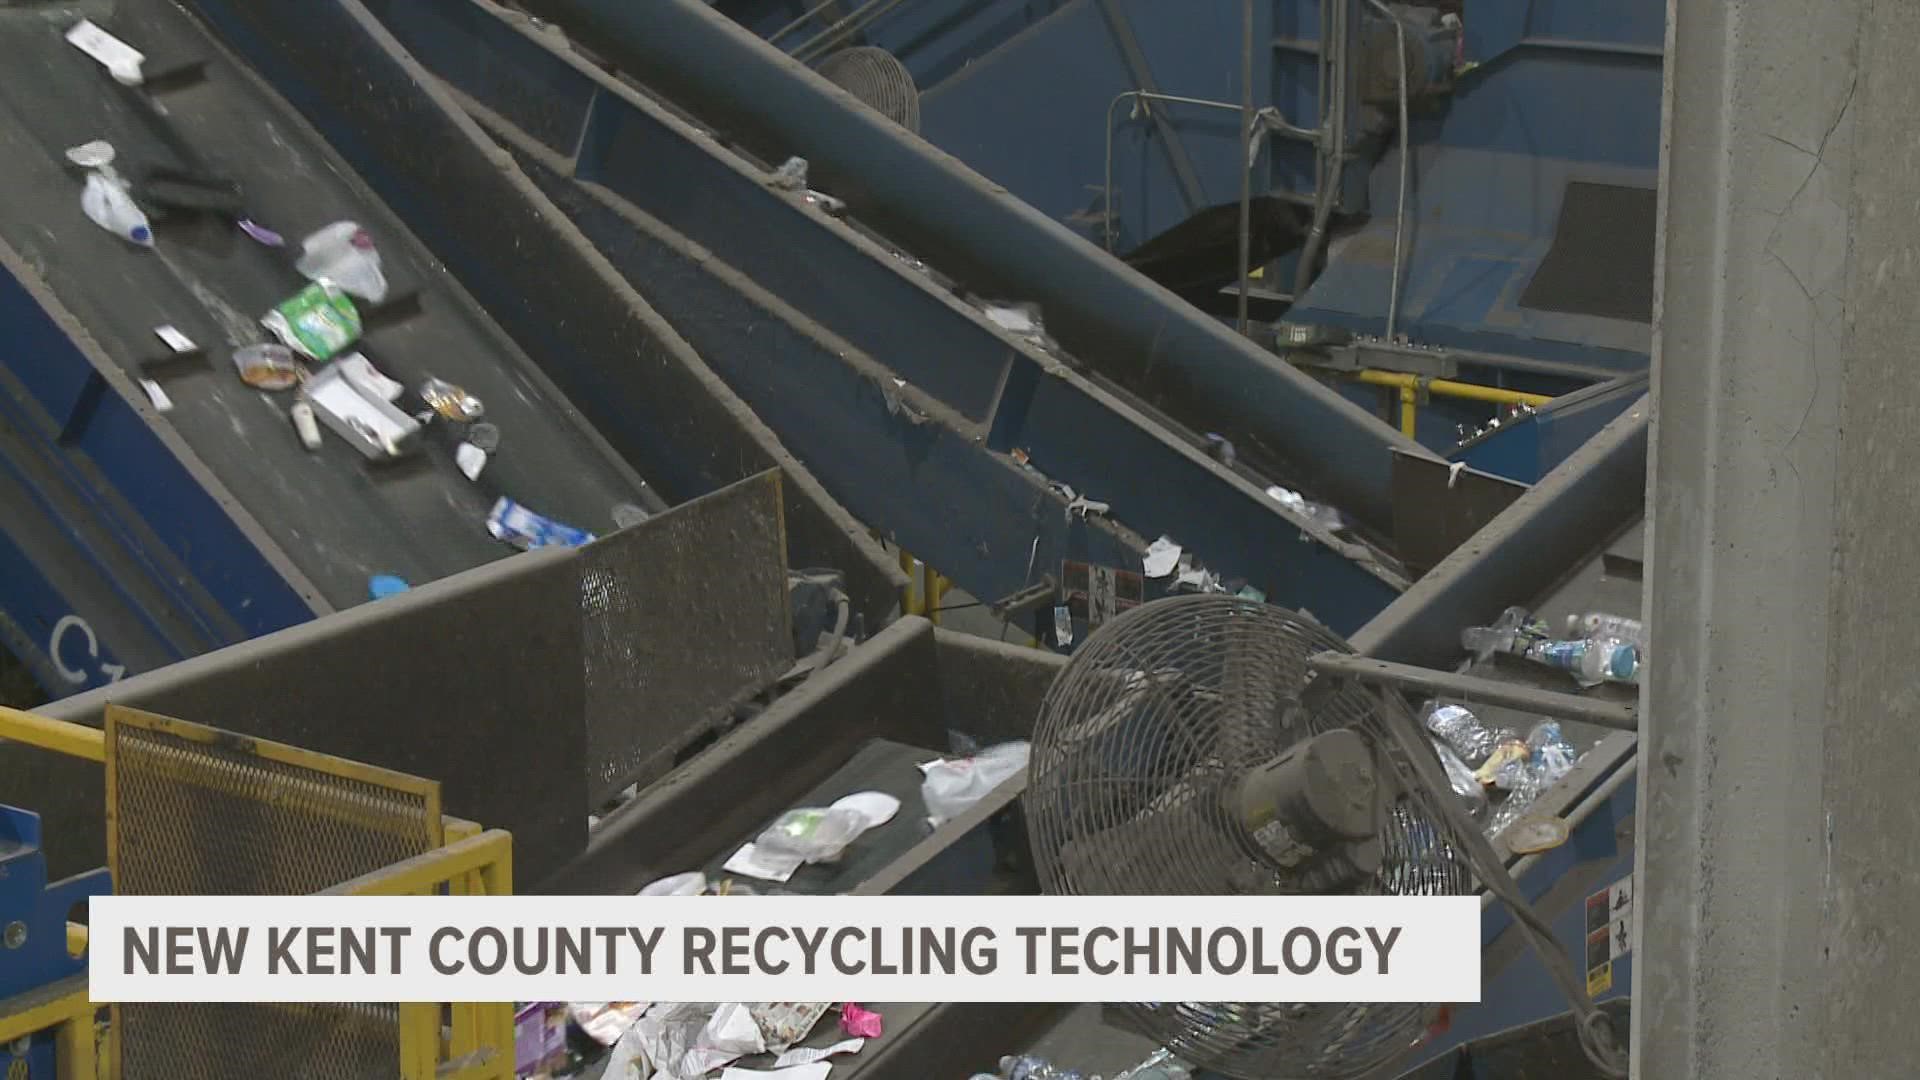 The recycling center in Kent County has installed a new 'optical sorter'.